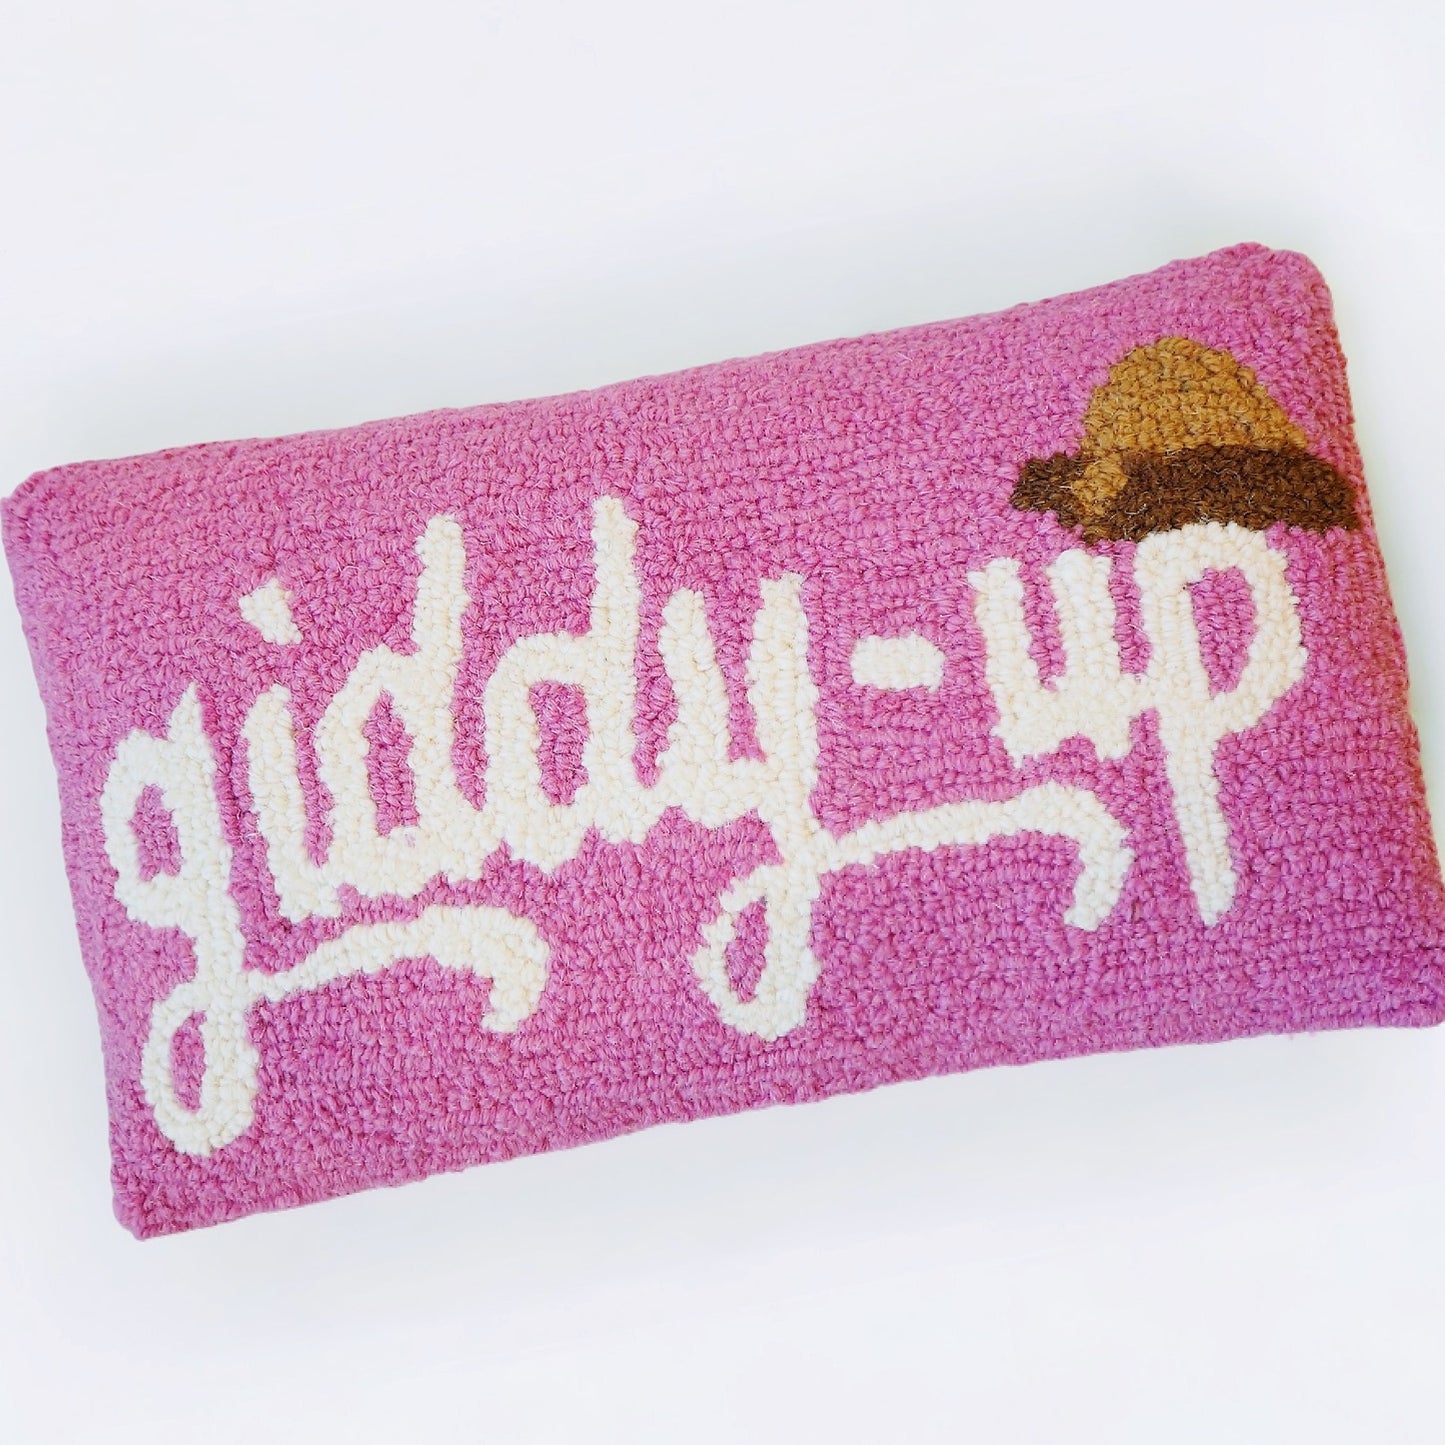 Giddy-Up Hooked Pillow